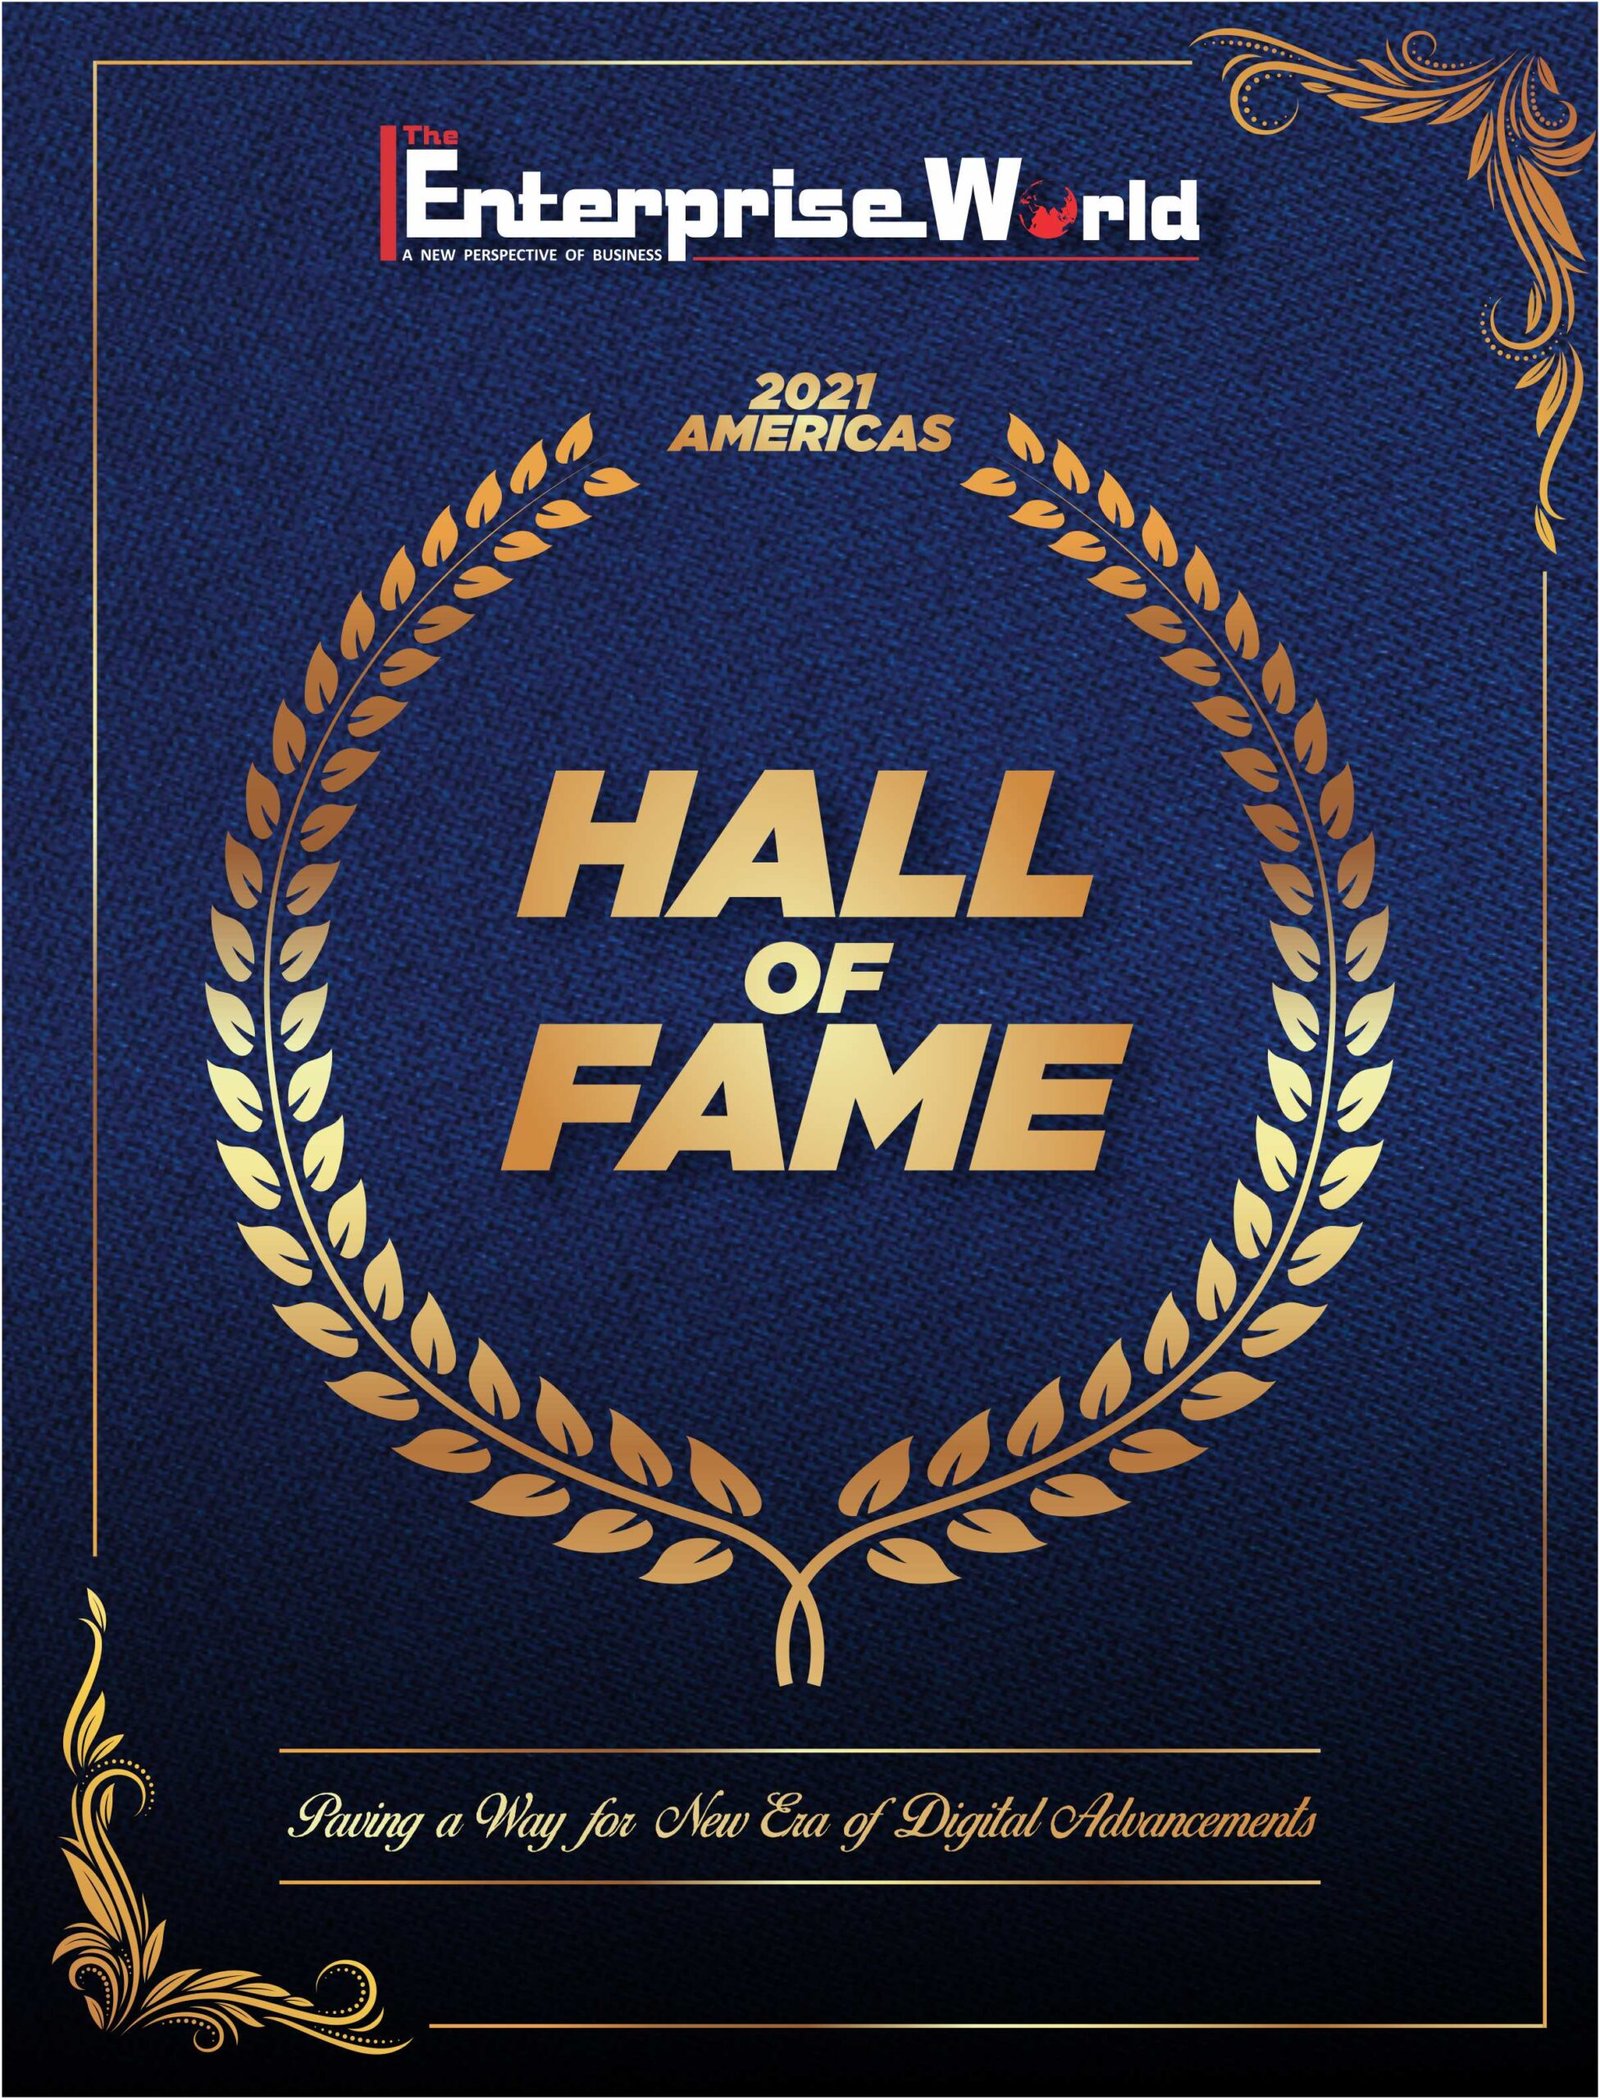 Hall of Fame - 2021 AMERICAS Edition